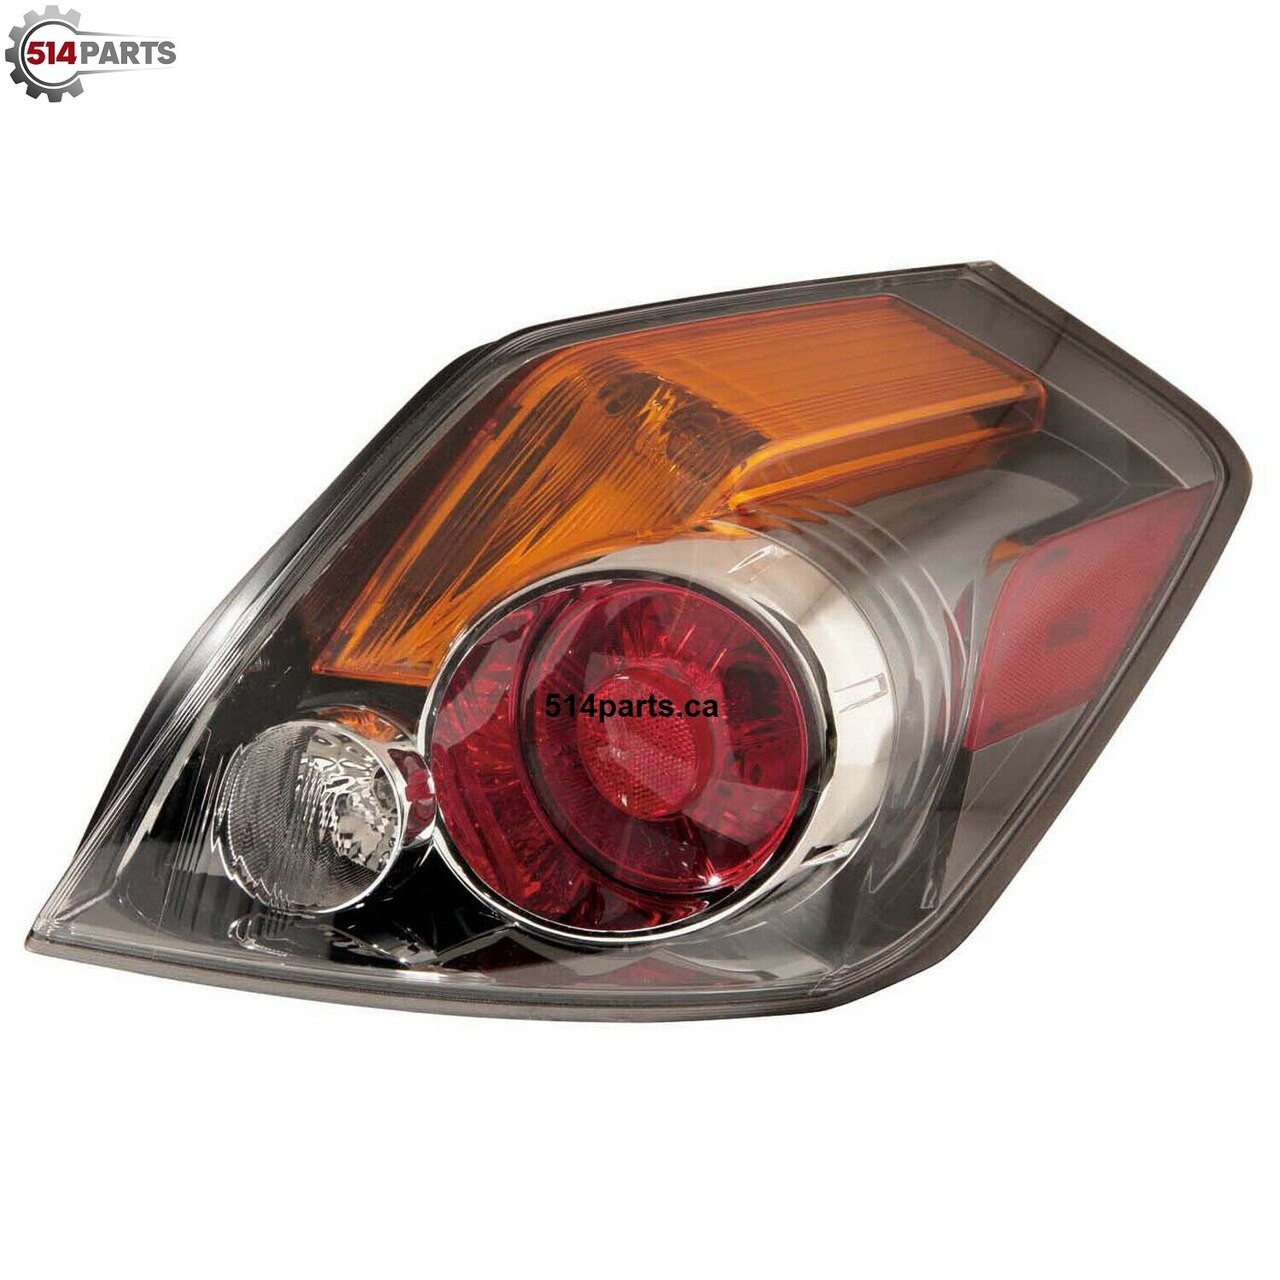 2010 - 2012 NISSAN ALTIMA and ALTIMA HYBRID TAIL LIGHTS - PHARES ARRIERE